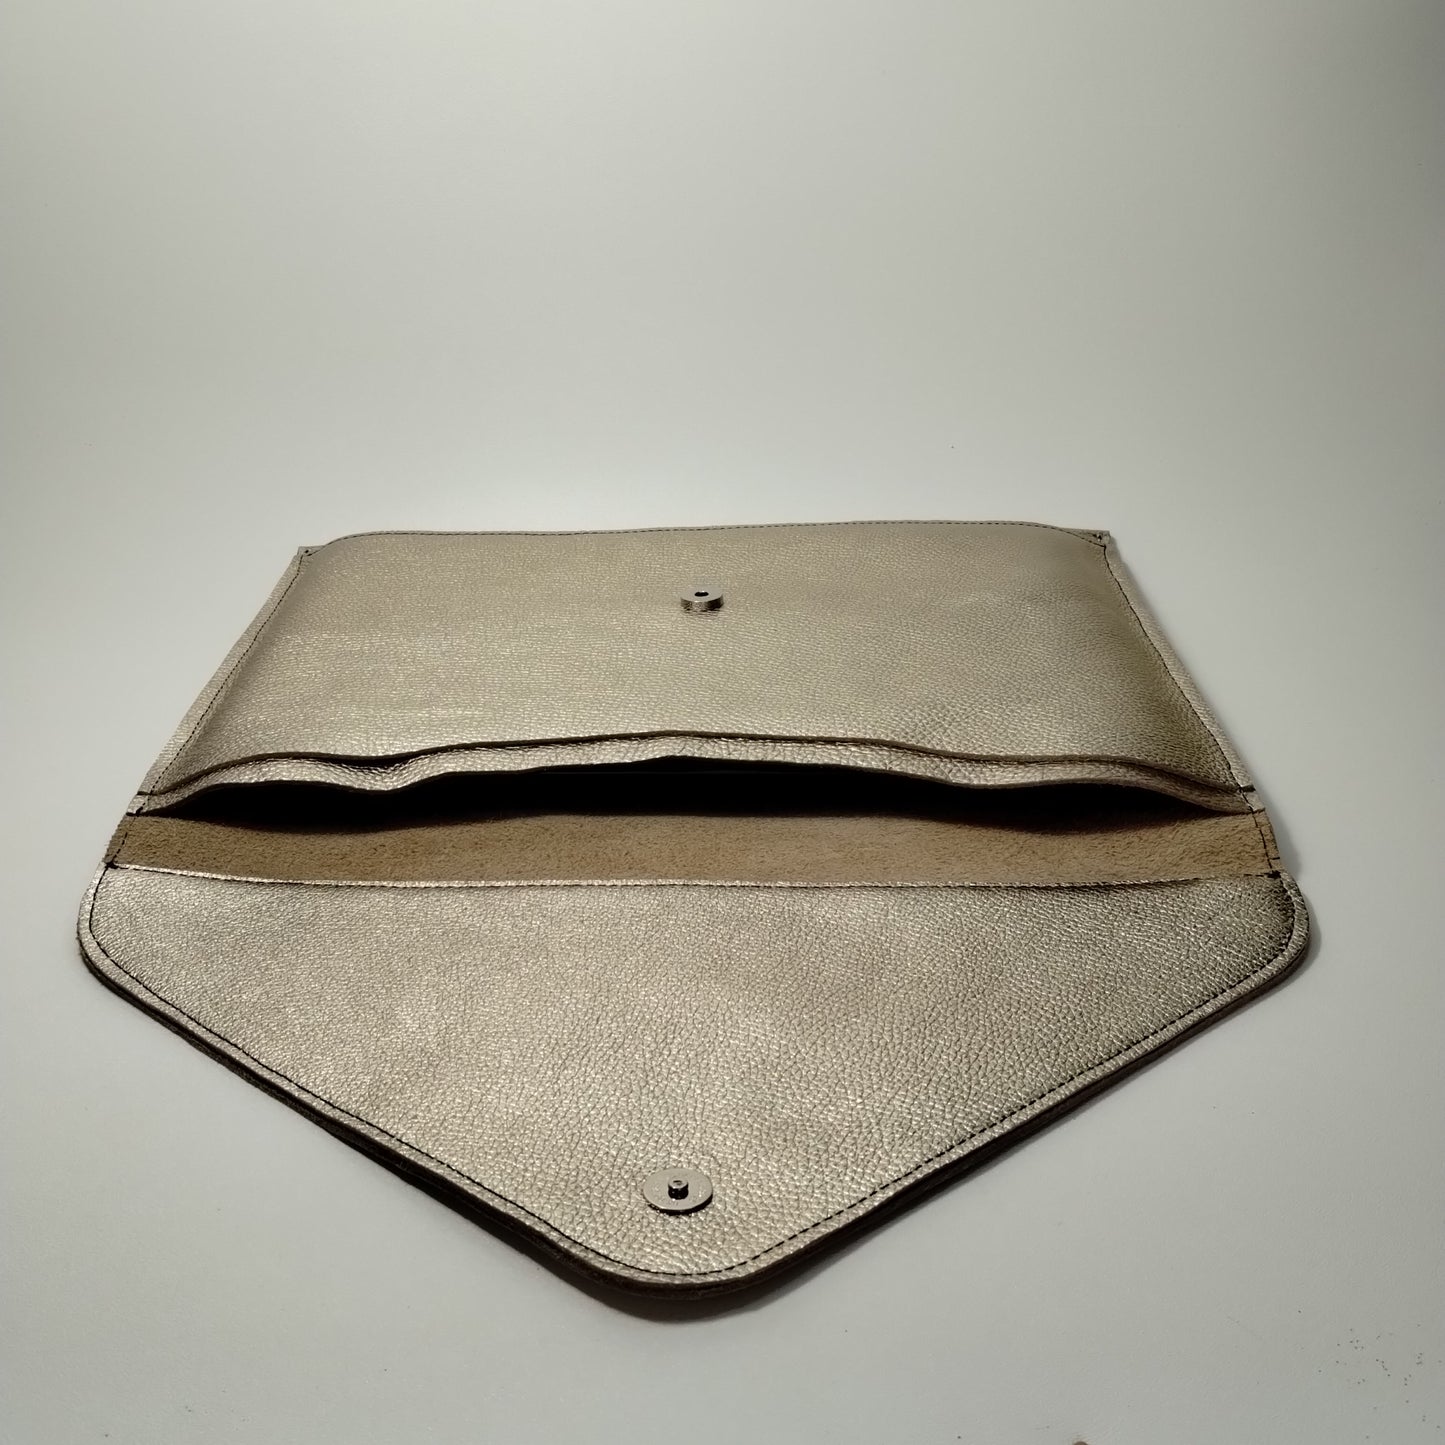 Laptop Clutch Cover